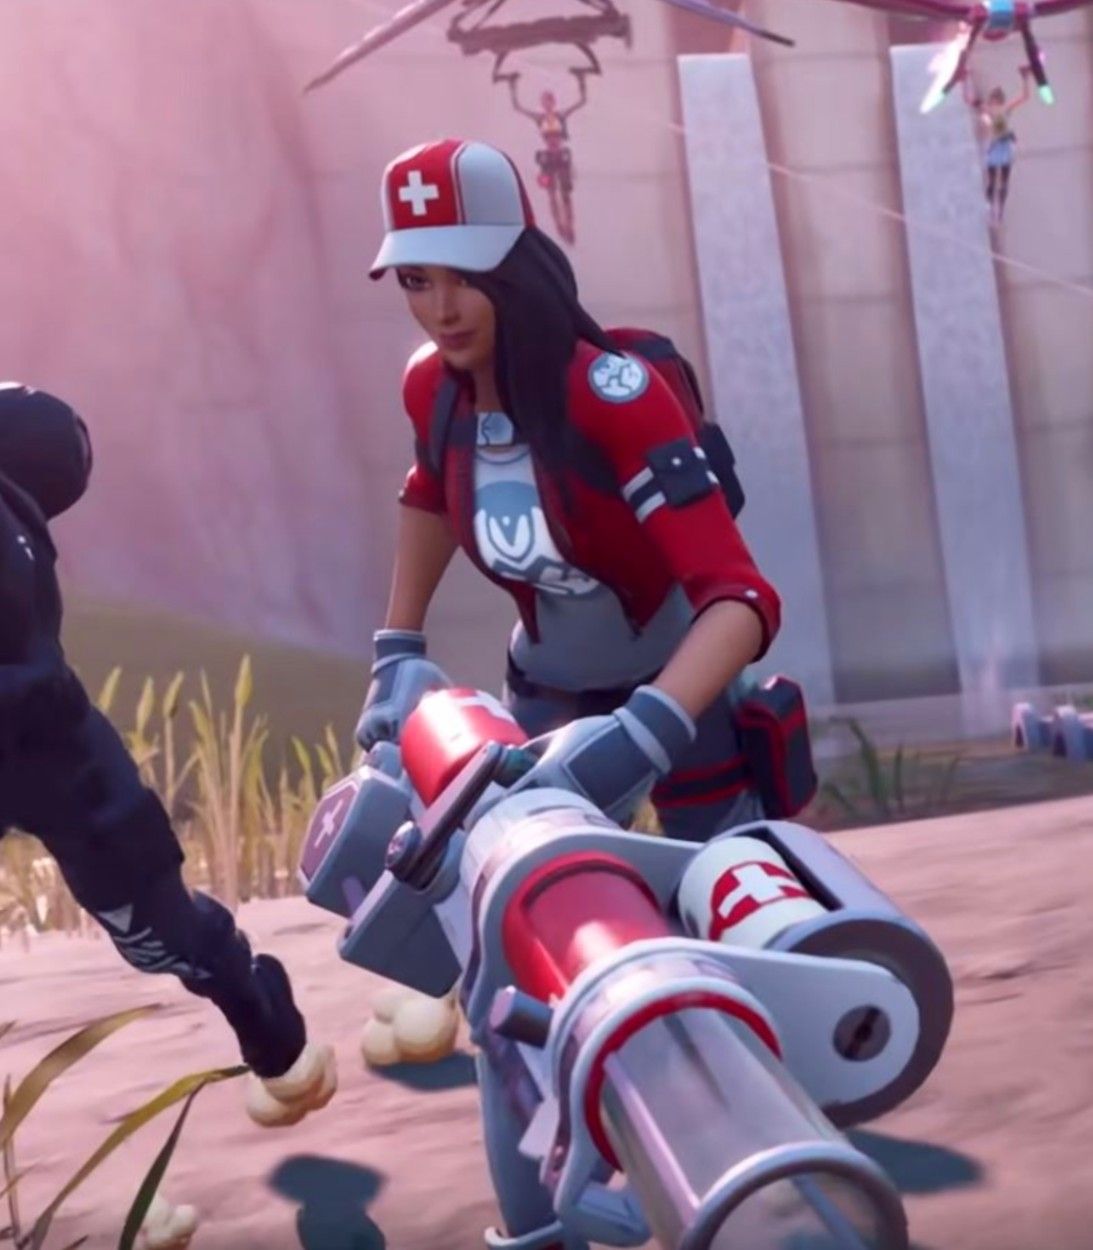 A player runs with the Bandage Bazooka in a match in Fortnite